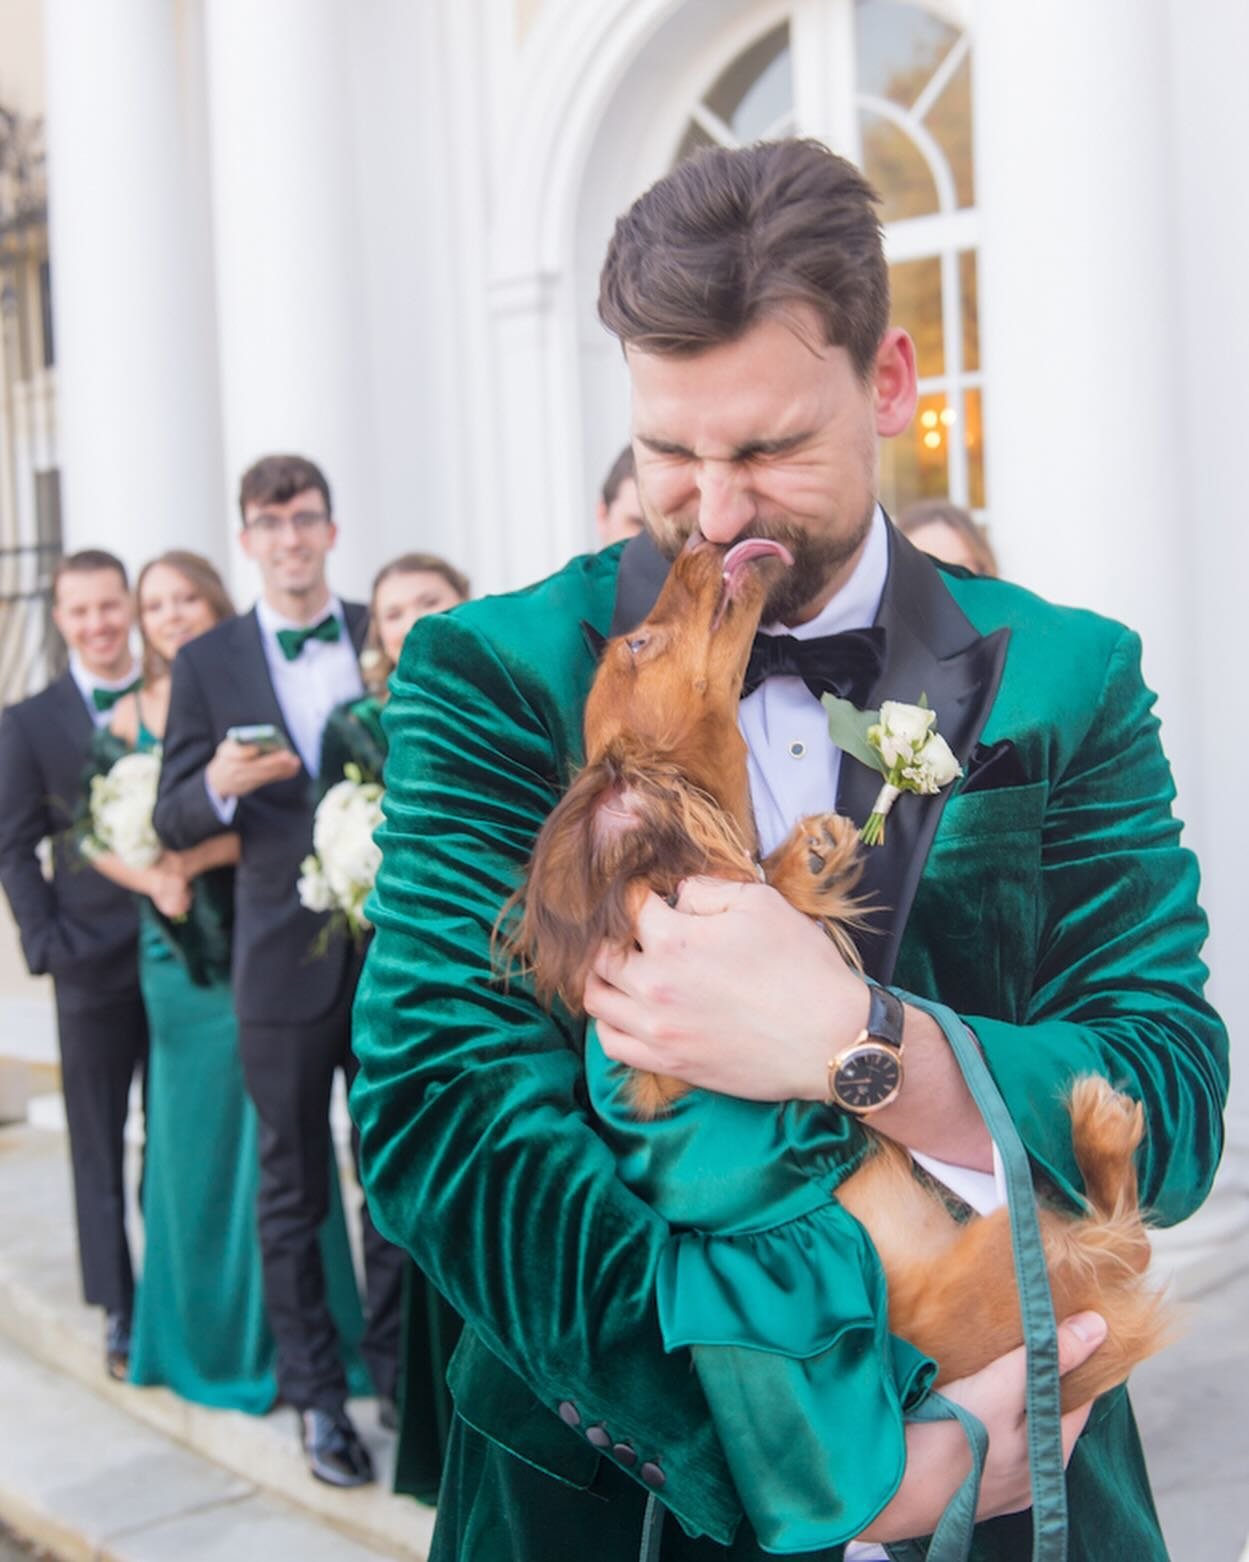 Starting our week with some cuteness overload! Stumbled upon these pics from last years wedding at @tuppermanor and had to post. Cannot wait to see all the furry friends that will be making a celeb appearance at our 2024 weddings! 

If you had your p